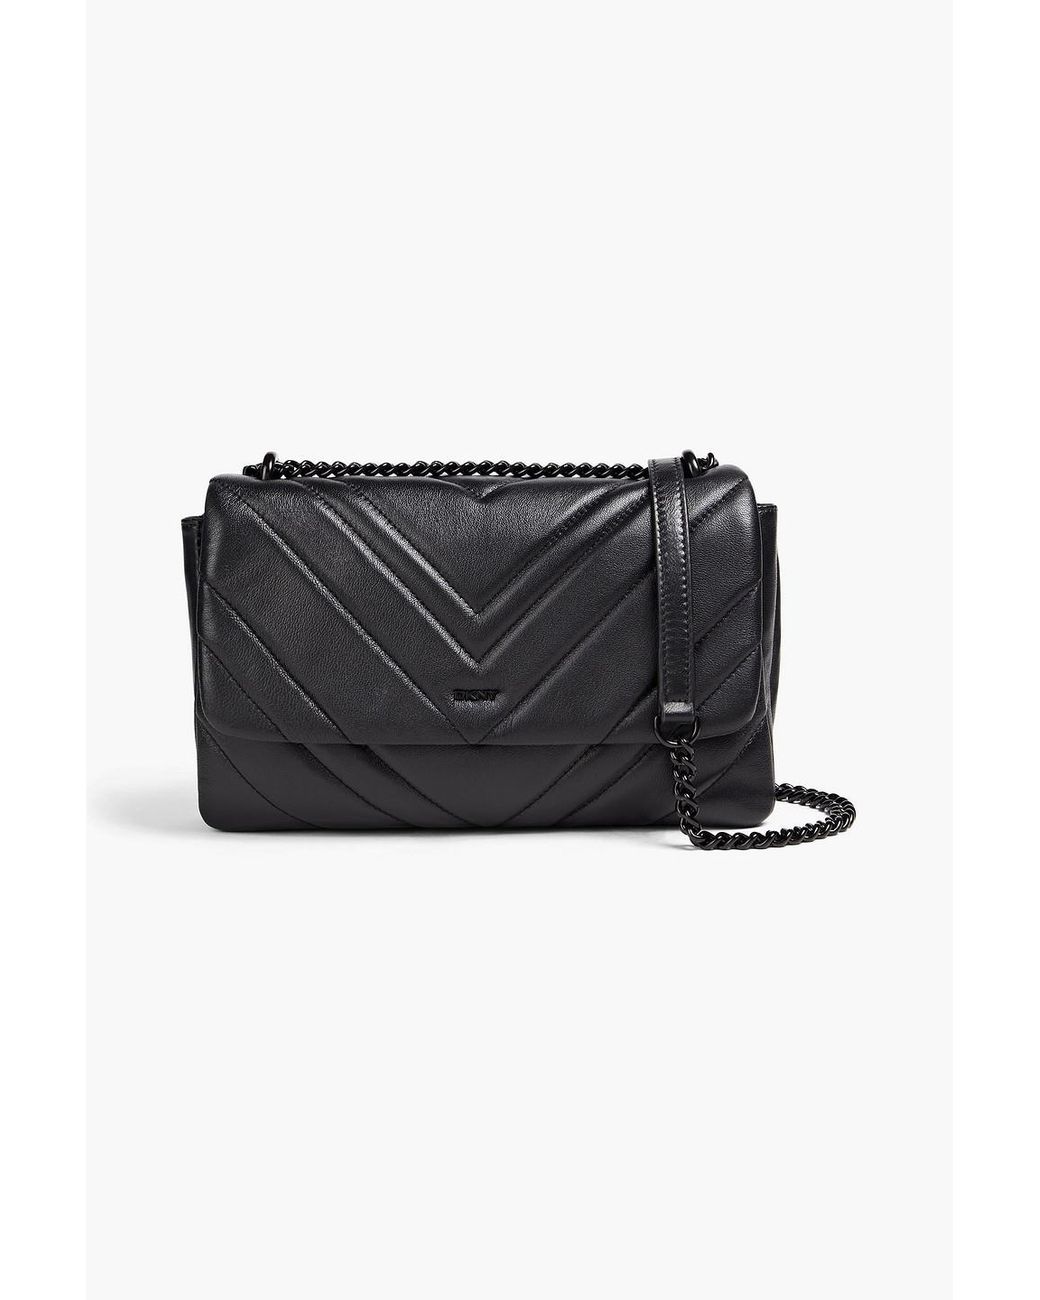 DKNY Quilted Leather Shoulder Bag in Black | Lyst Canada